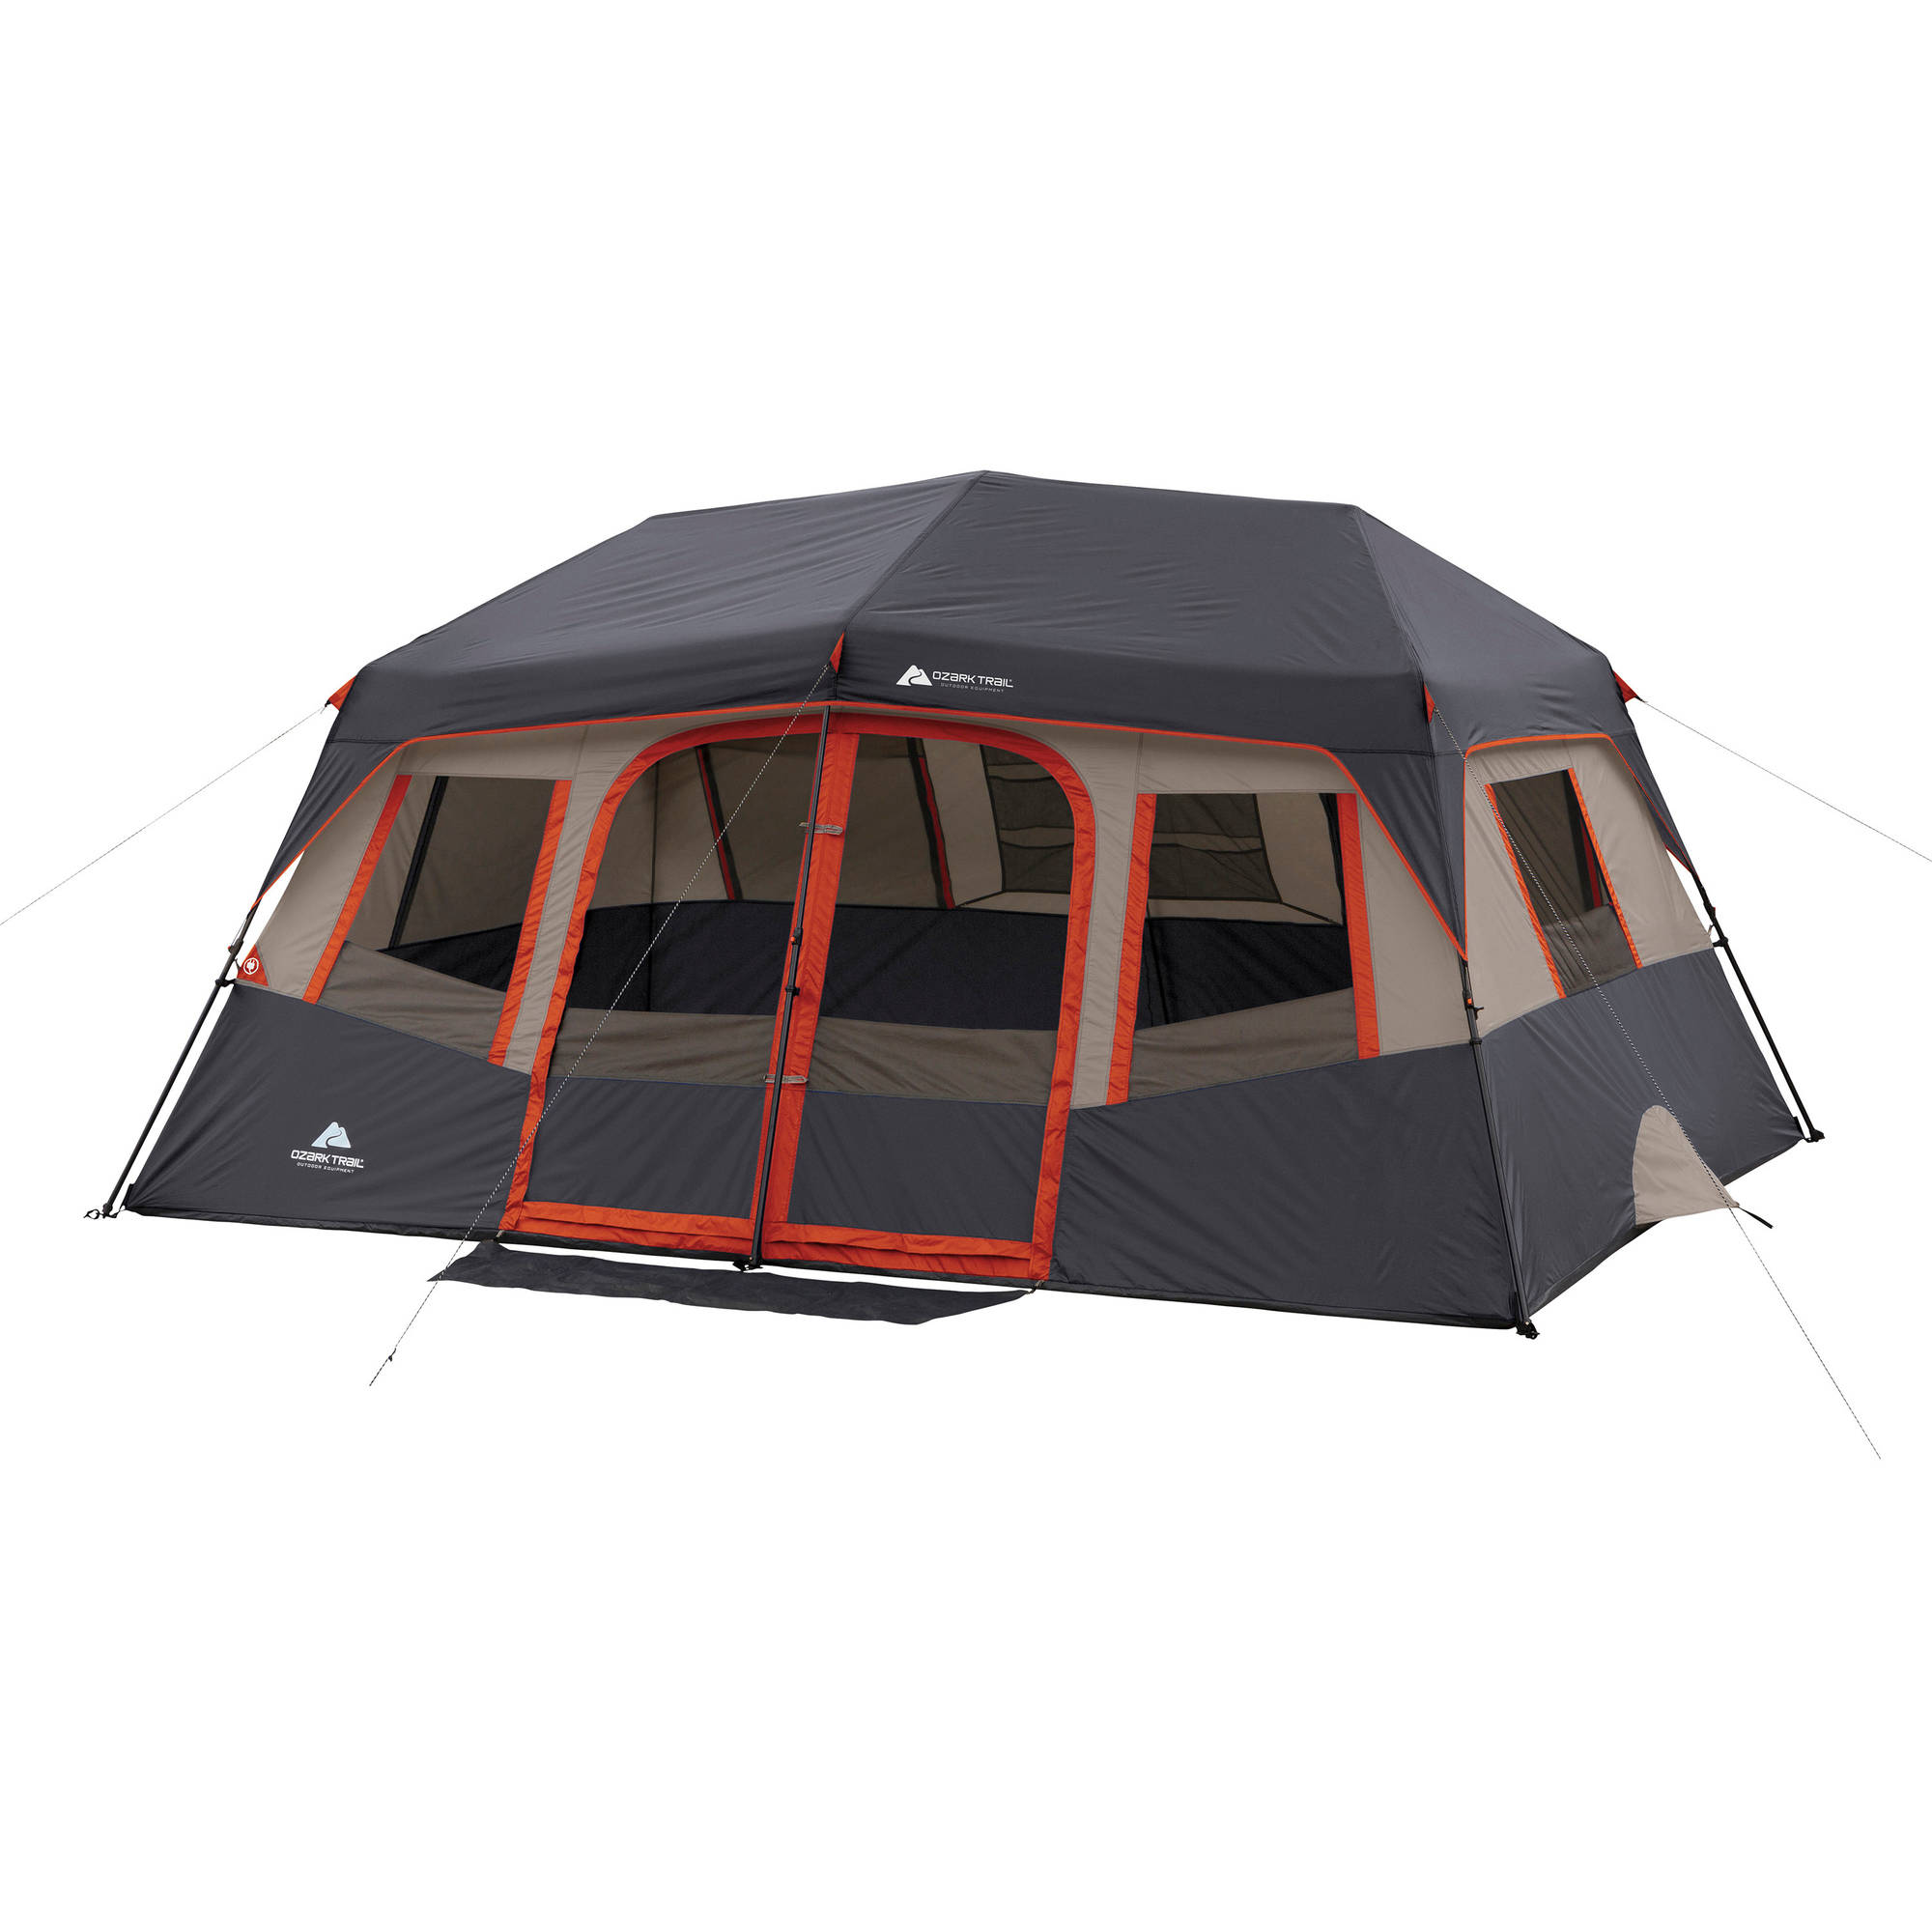 Ozark Trail 14' x 10' 10-Person Instant Cabin Tent, 31.86 lbs - image 1 of 2